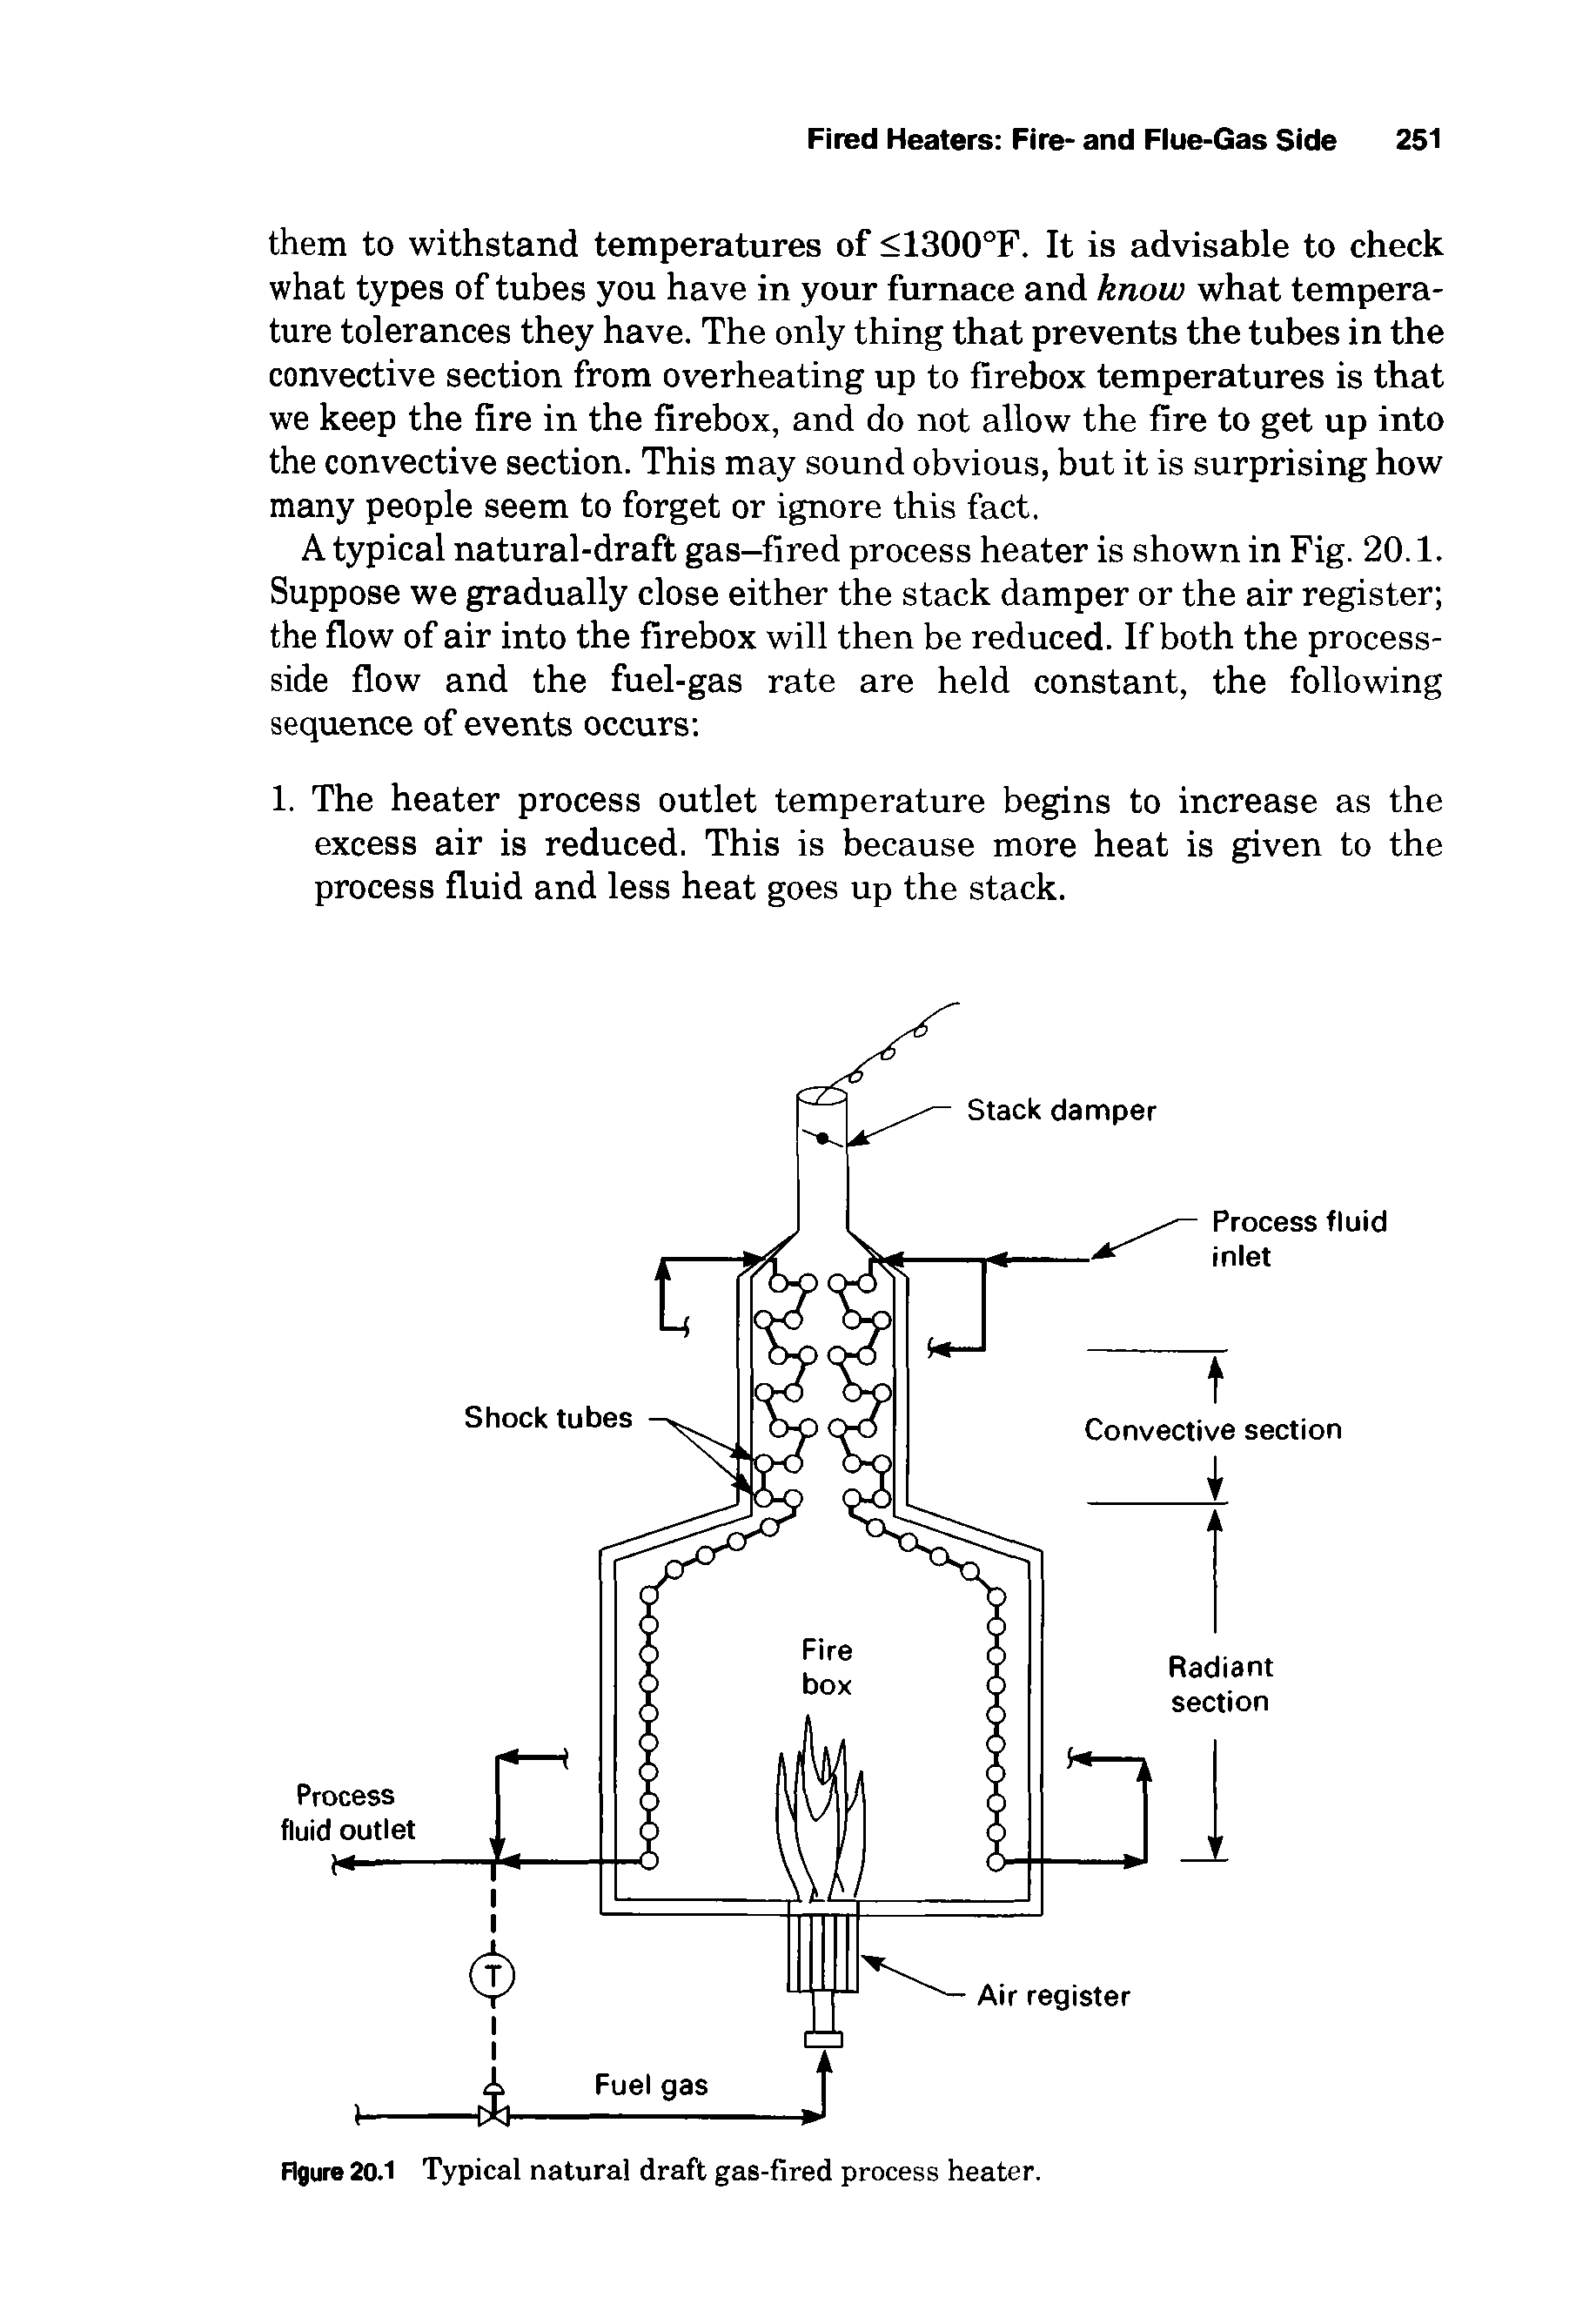 Figure 20.1 Typical natural draft gas-fired process heater.